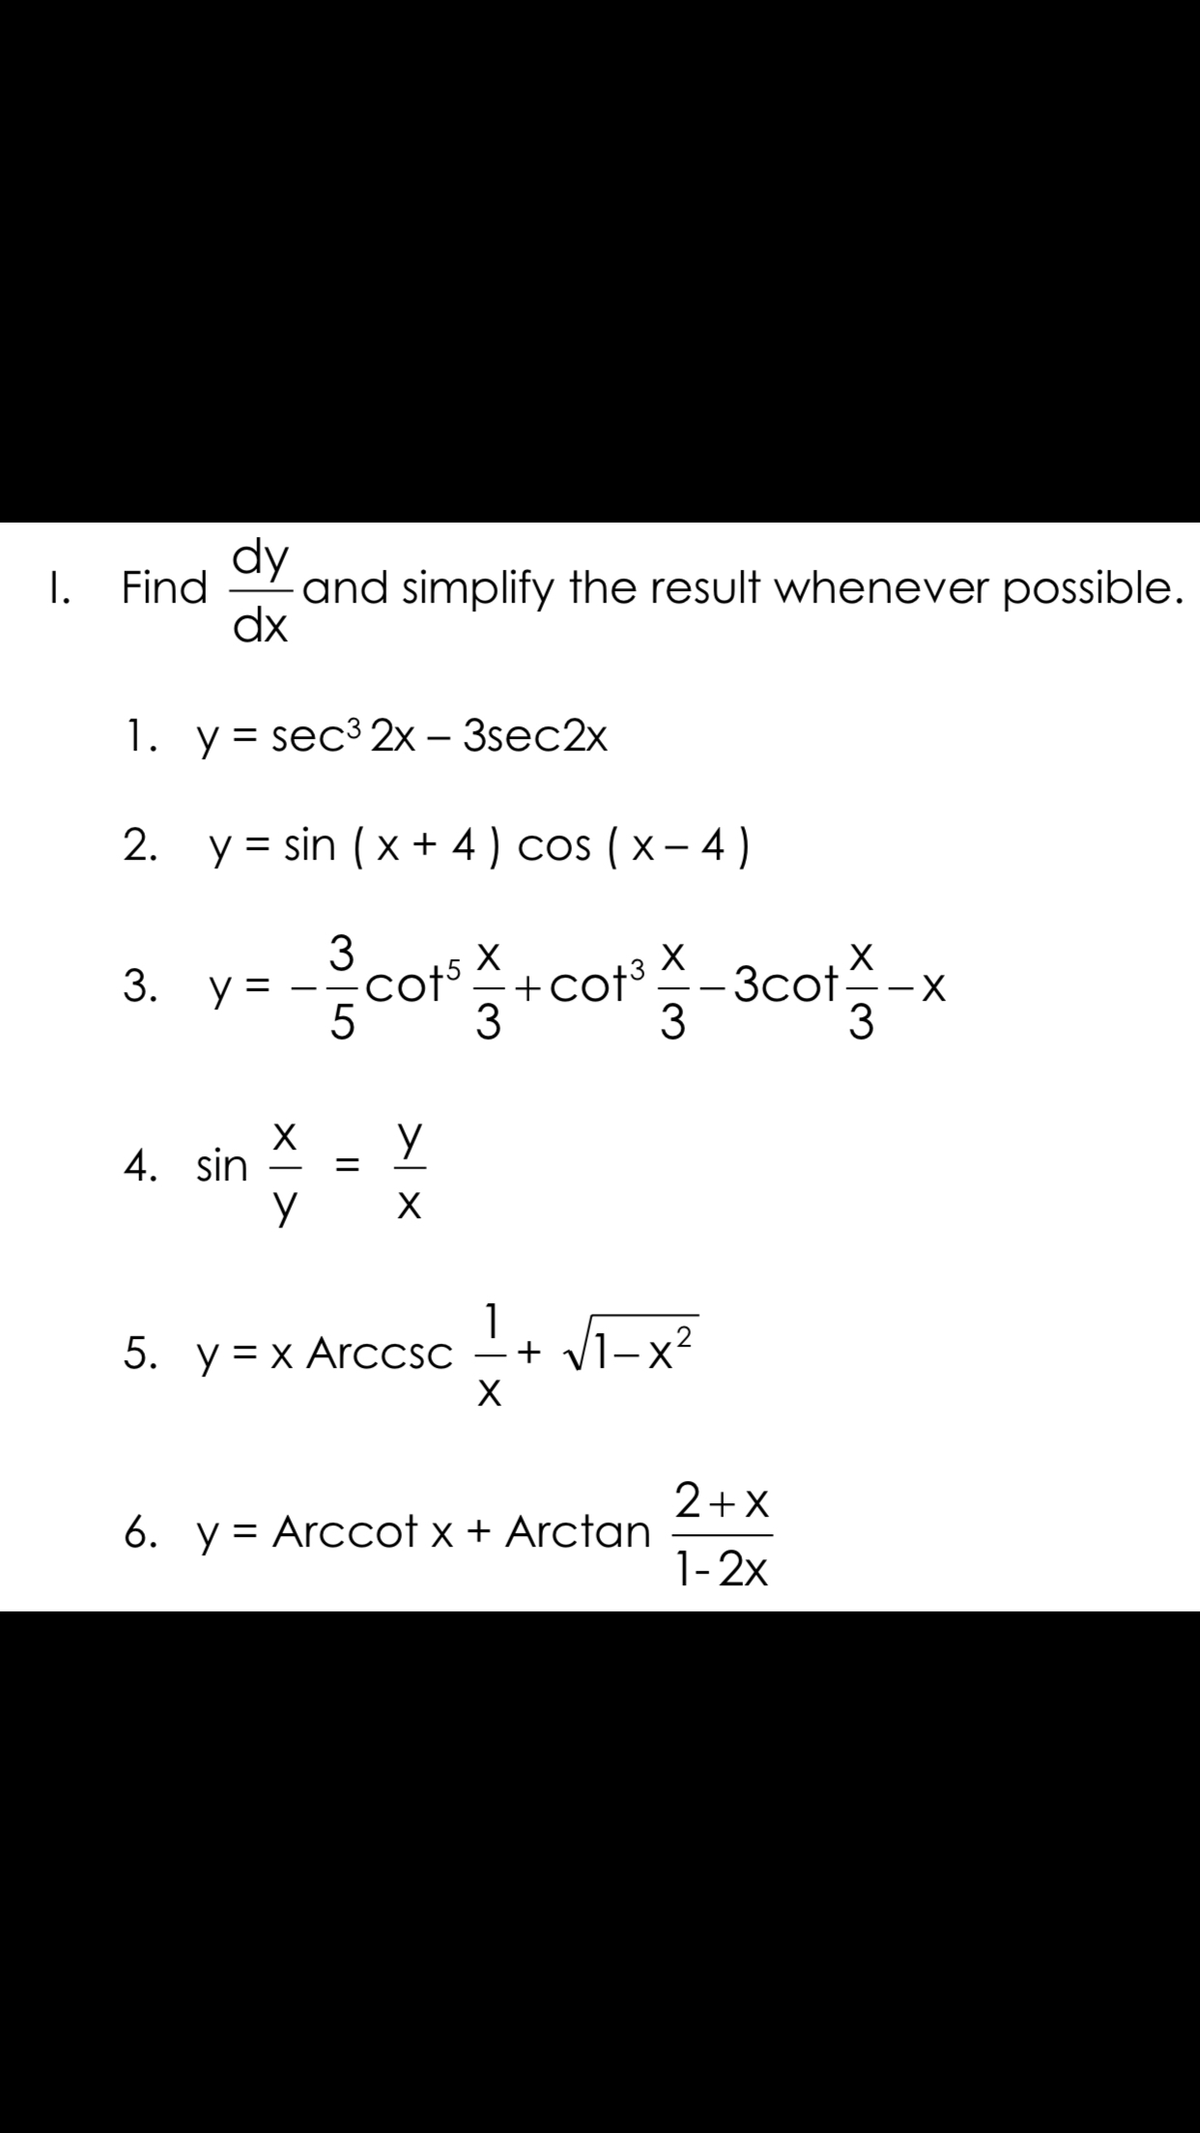 dy
I.
Find
and simplify the result whenever possible.
dx
1. у%3D sec3 2х - 3sec2x
2. y = sin (x + 4 ) cos ( x – 4 )
3
cot cof -acot-
cot+cot3
3cot -x
3
3. у3D
cots.
5
3
4. sin
%3D
1.
5. y= x ArcCSC
+ Vi-x?
2+X
6. y = Arccot x + Arctan
1-2x
